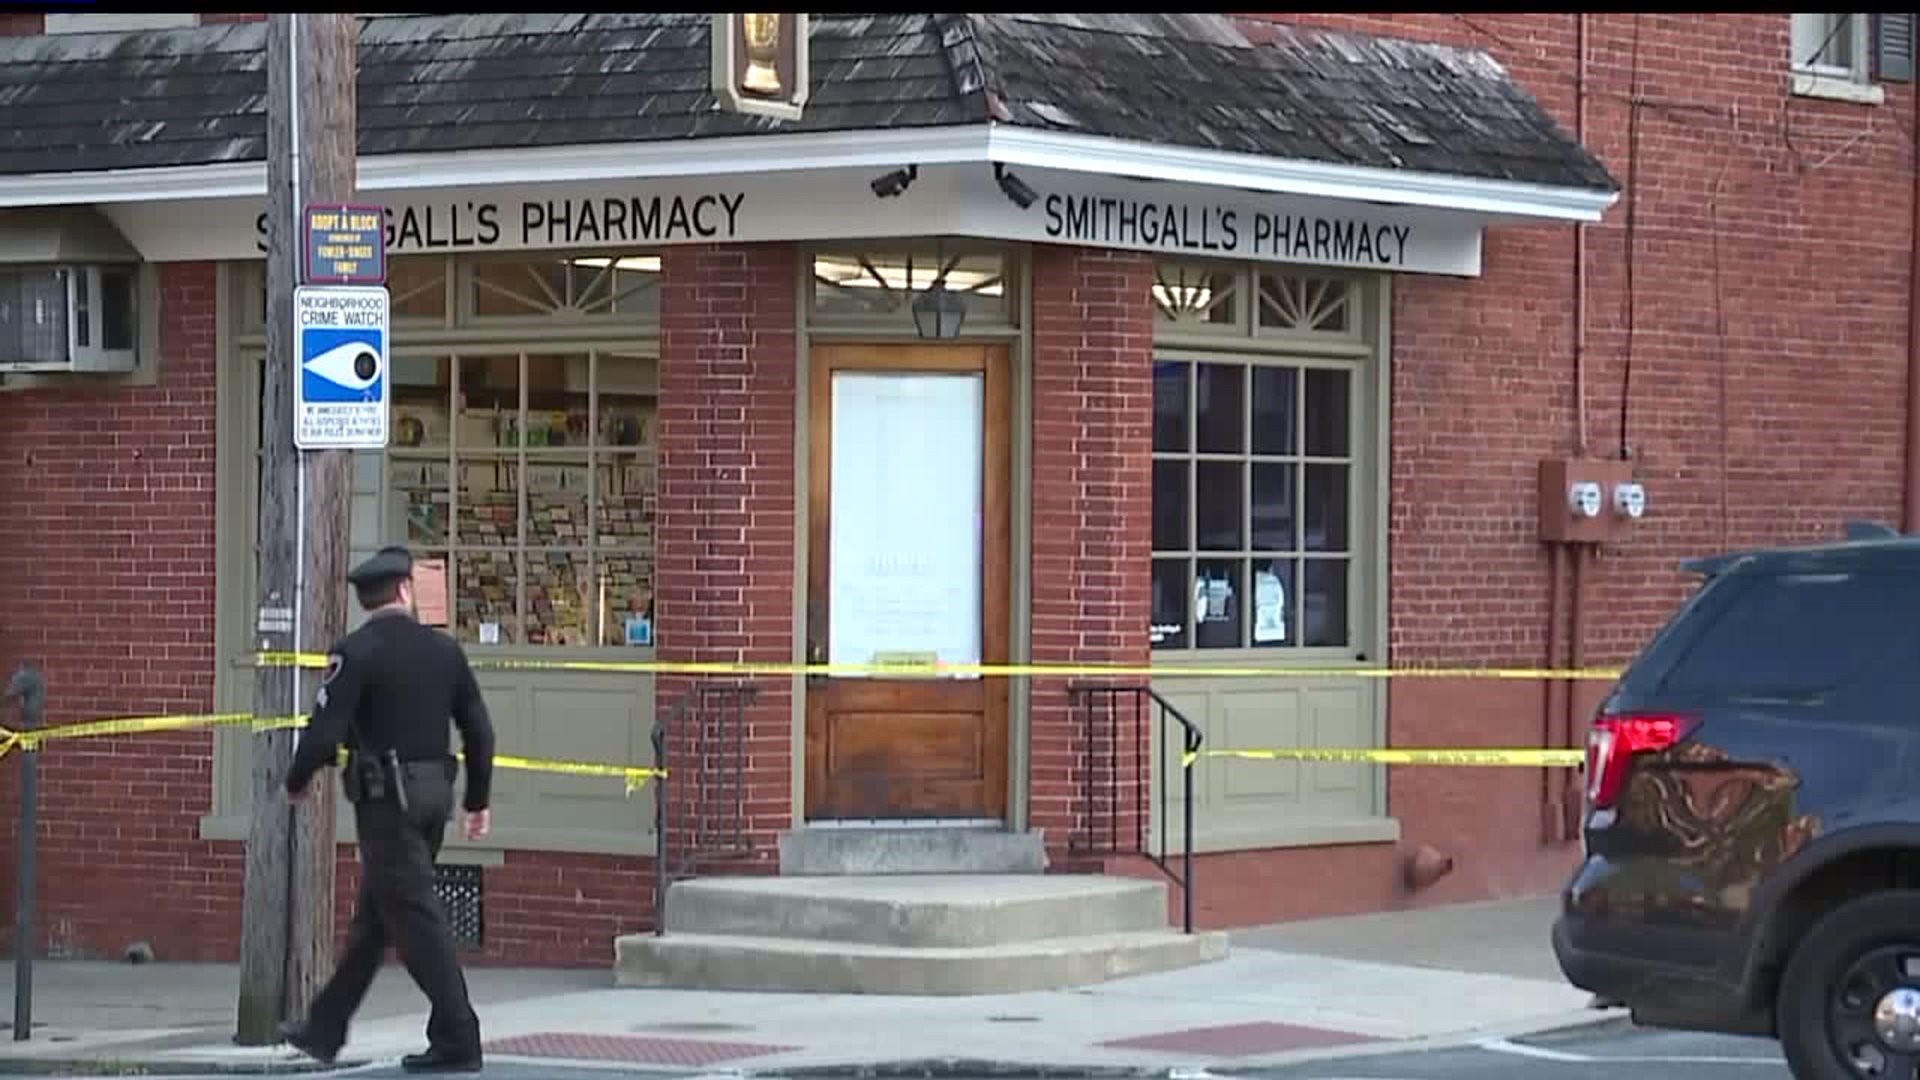 Police: Lancaster pharmacy clerk pulls weapon on suspects during armed robbery